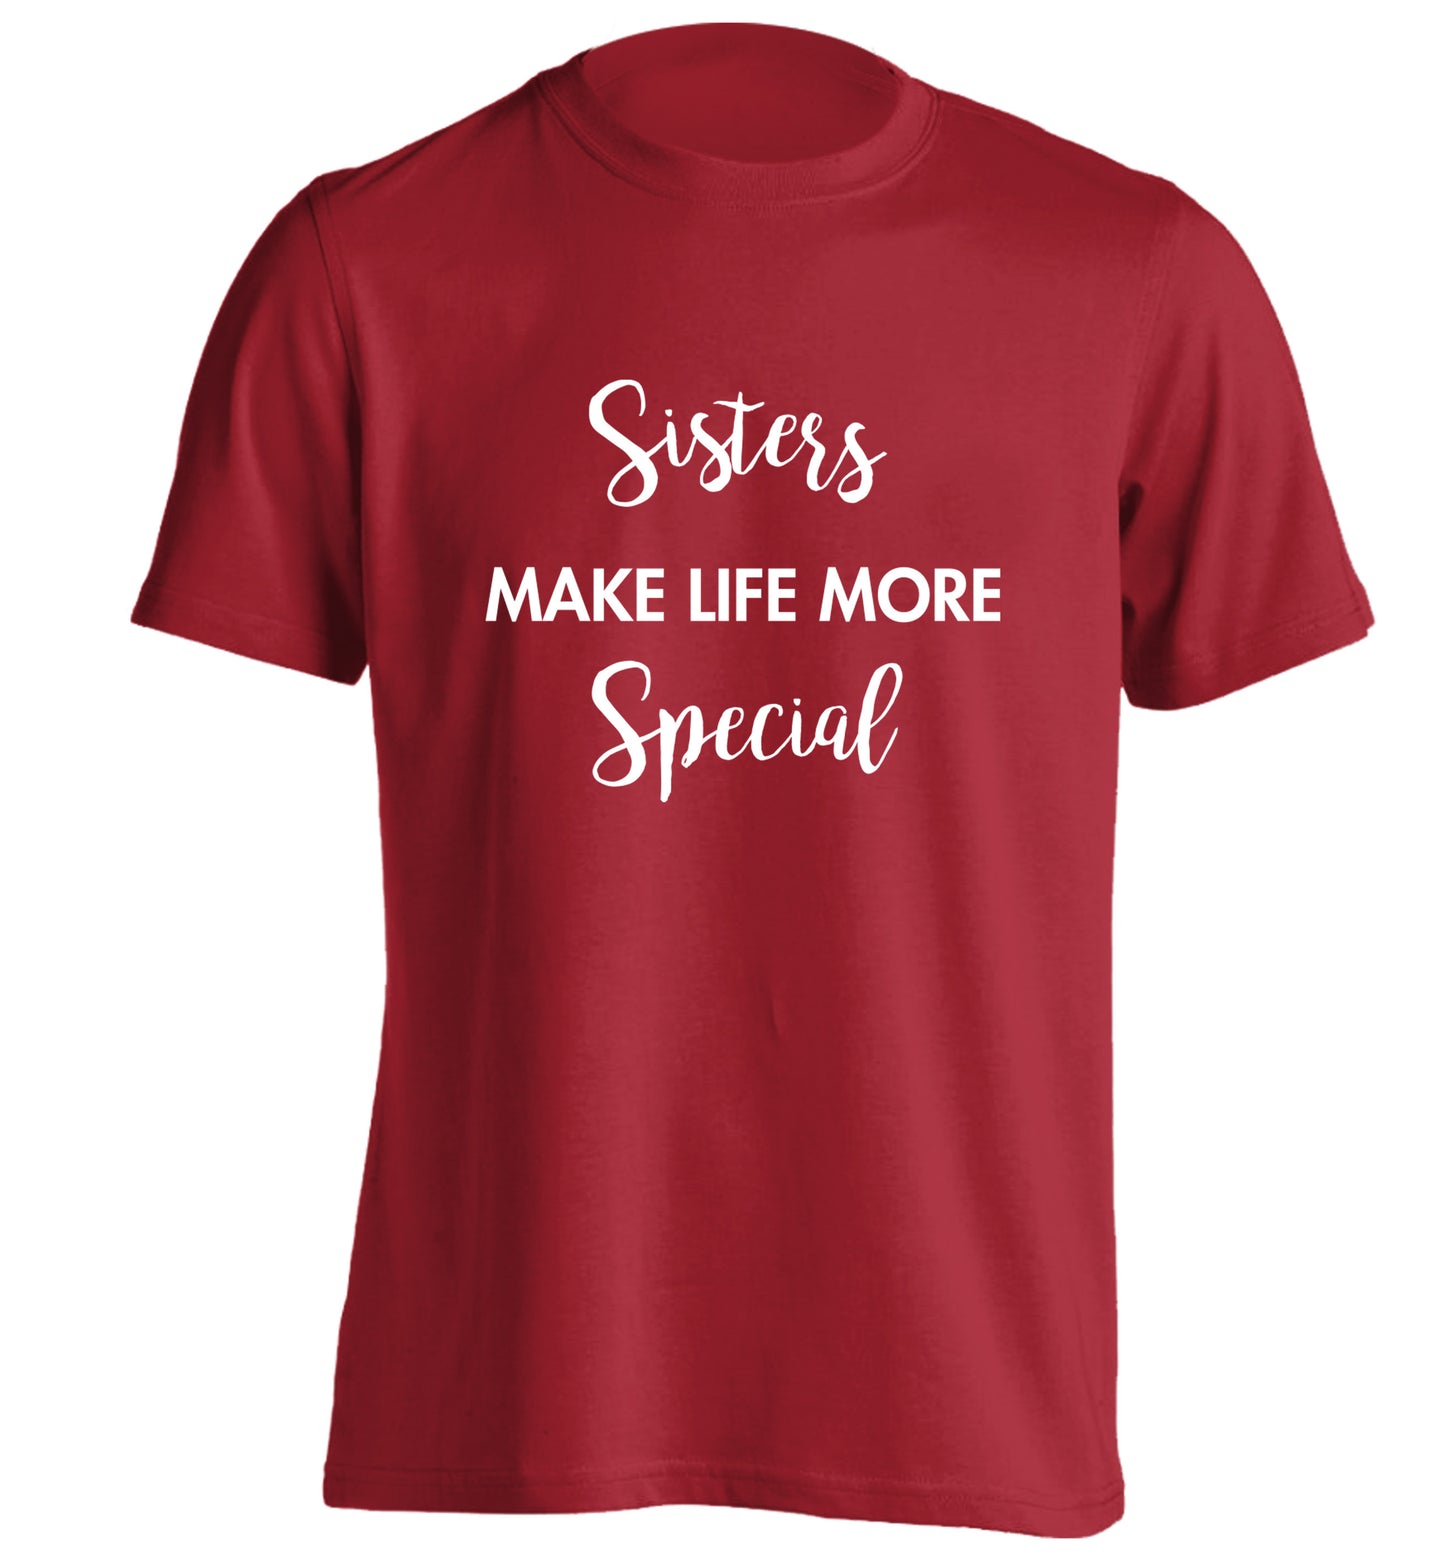 Sisters make life more special adults unisex red Tshirt 2XL